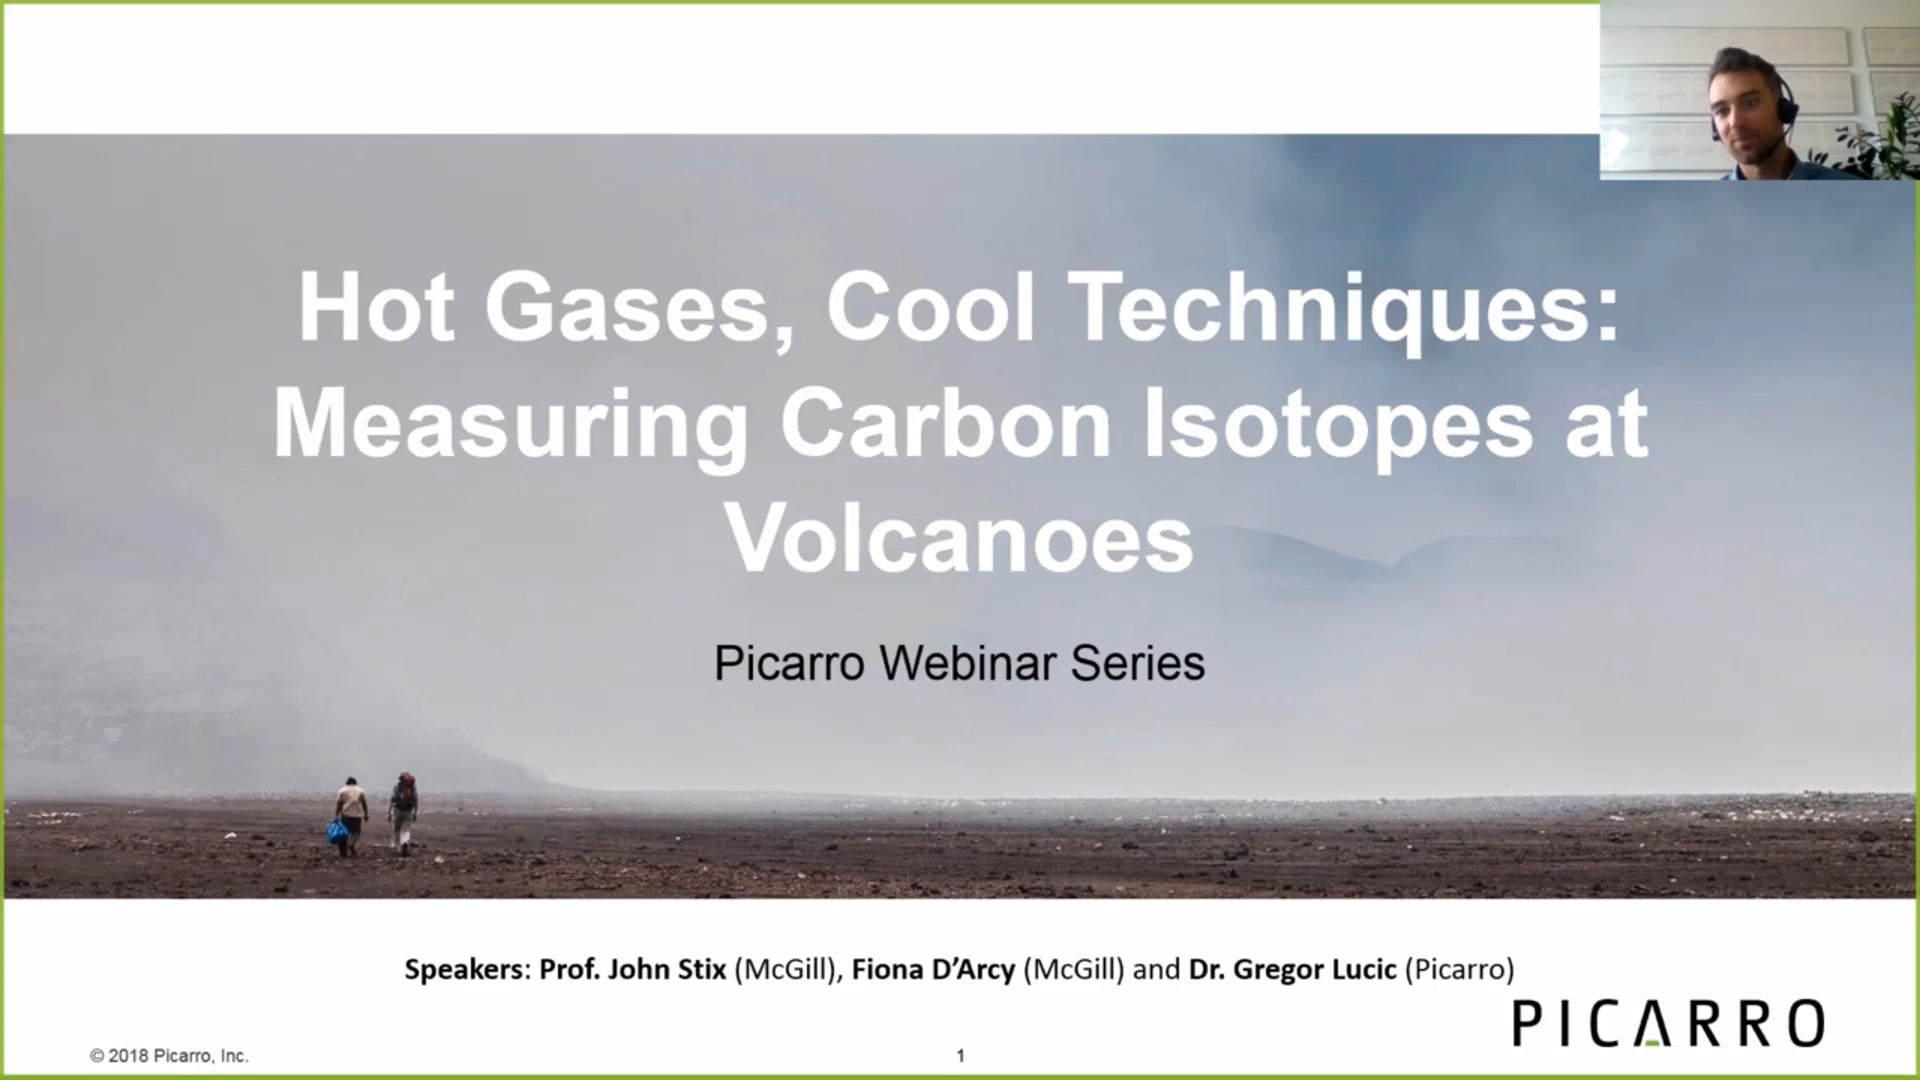 Hot Gases, Cool Techniques: Measuring Carbon Isotopes at Volcanoes